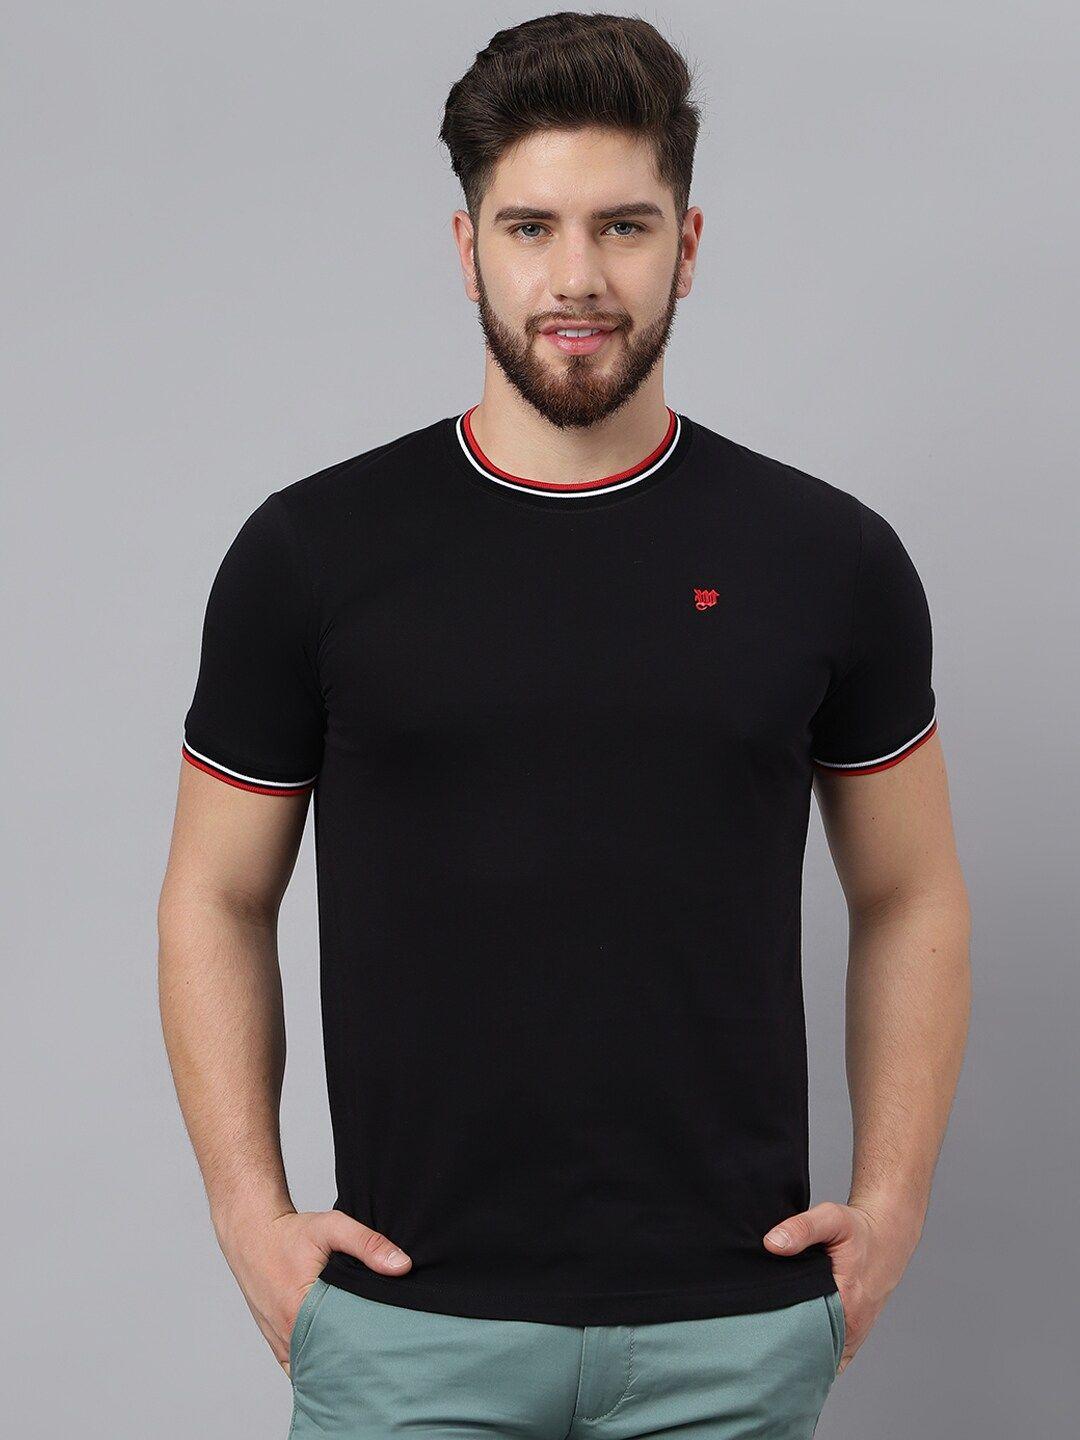 woods round neck pure cotton casual t-shirt